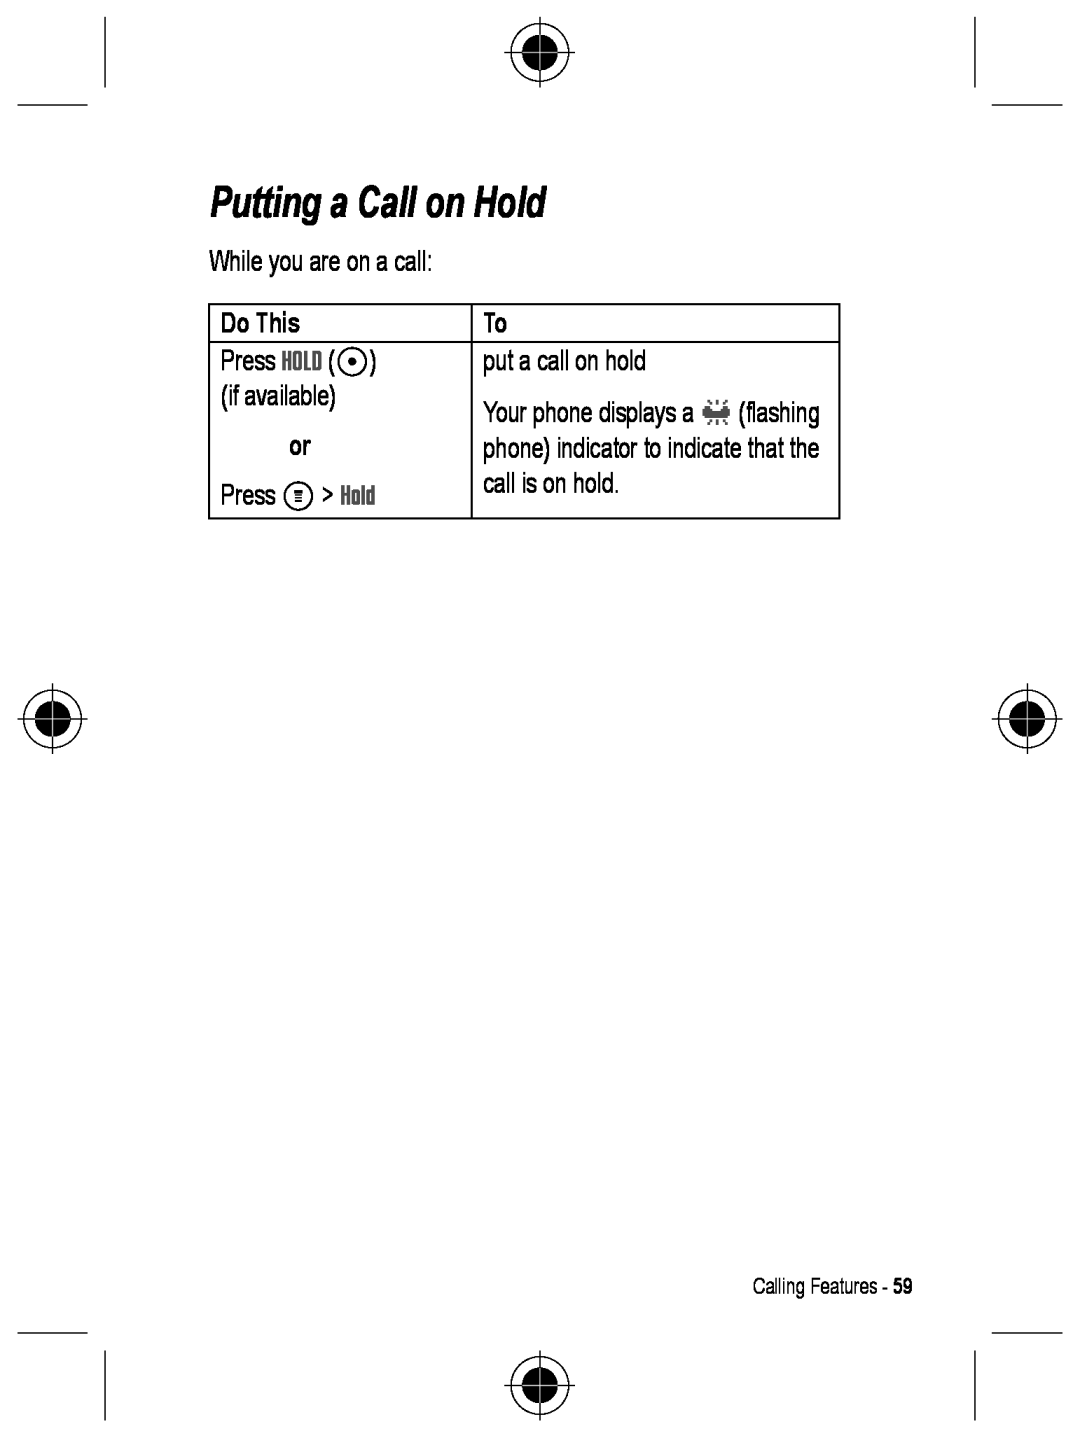 Motorola C330 manual Putting a Call on Hold, While you are on a call, Press HOLD +, put a call on hold, if available 